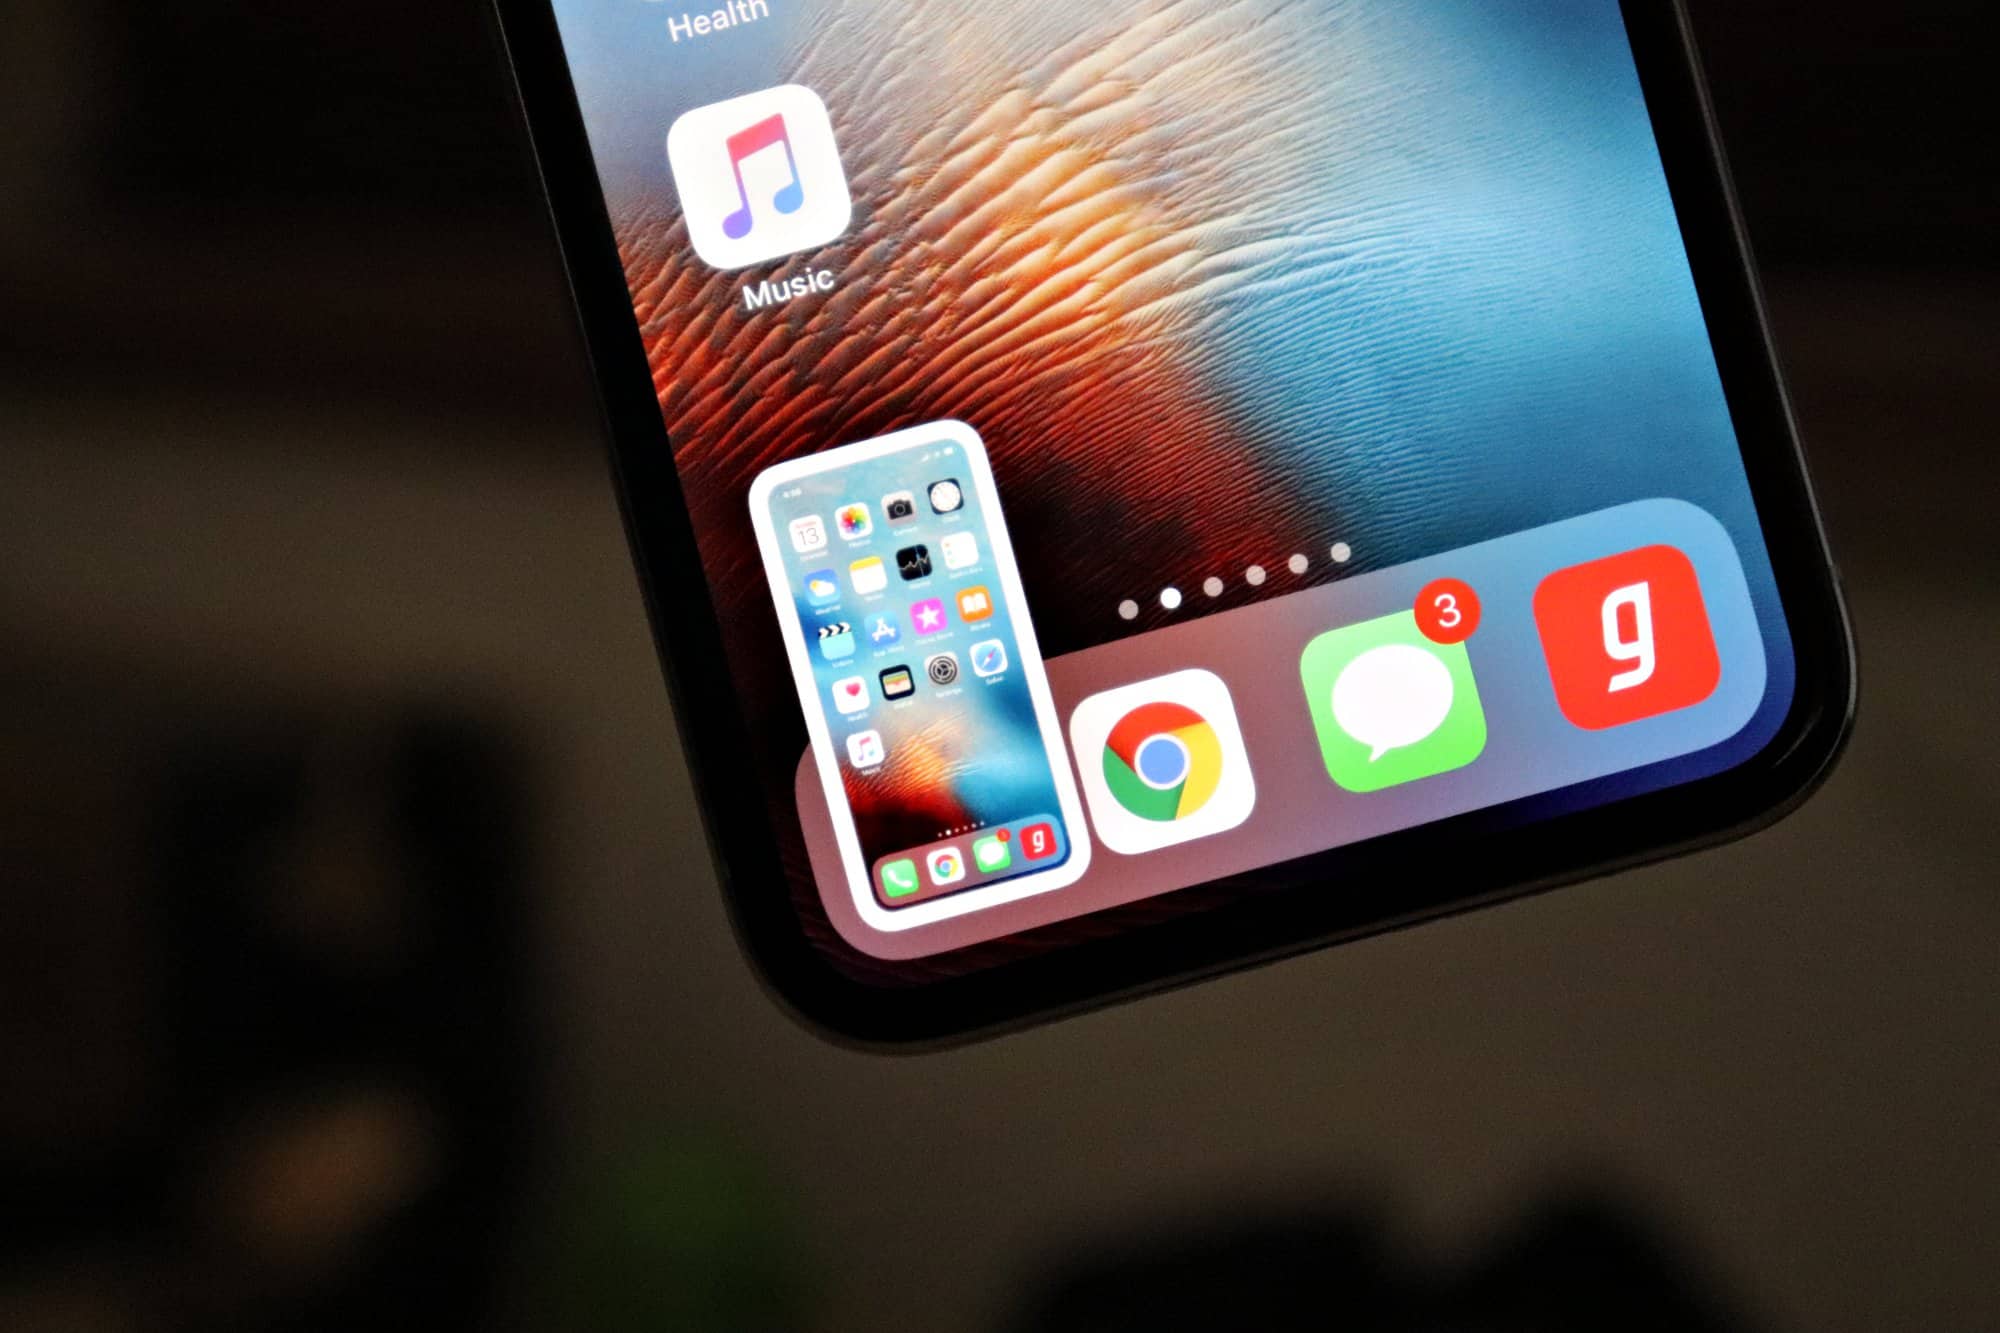 How to avoid accidental screenshots on iPhone X